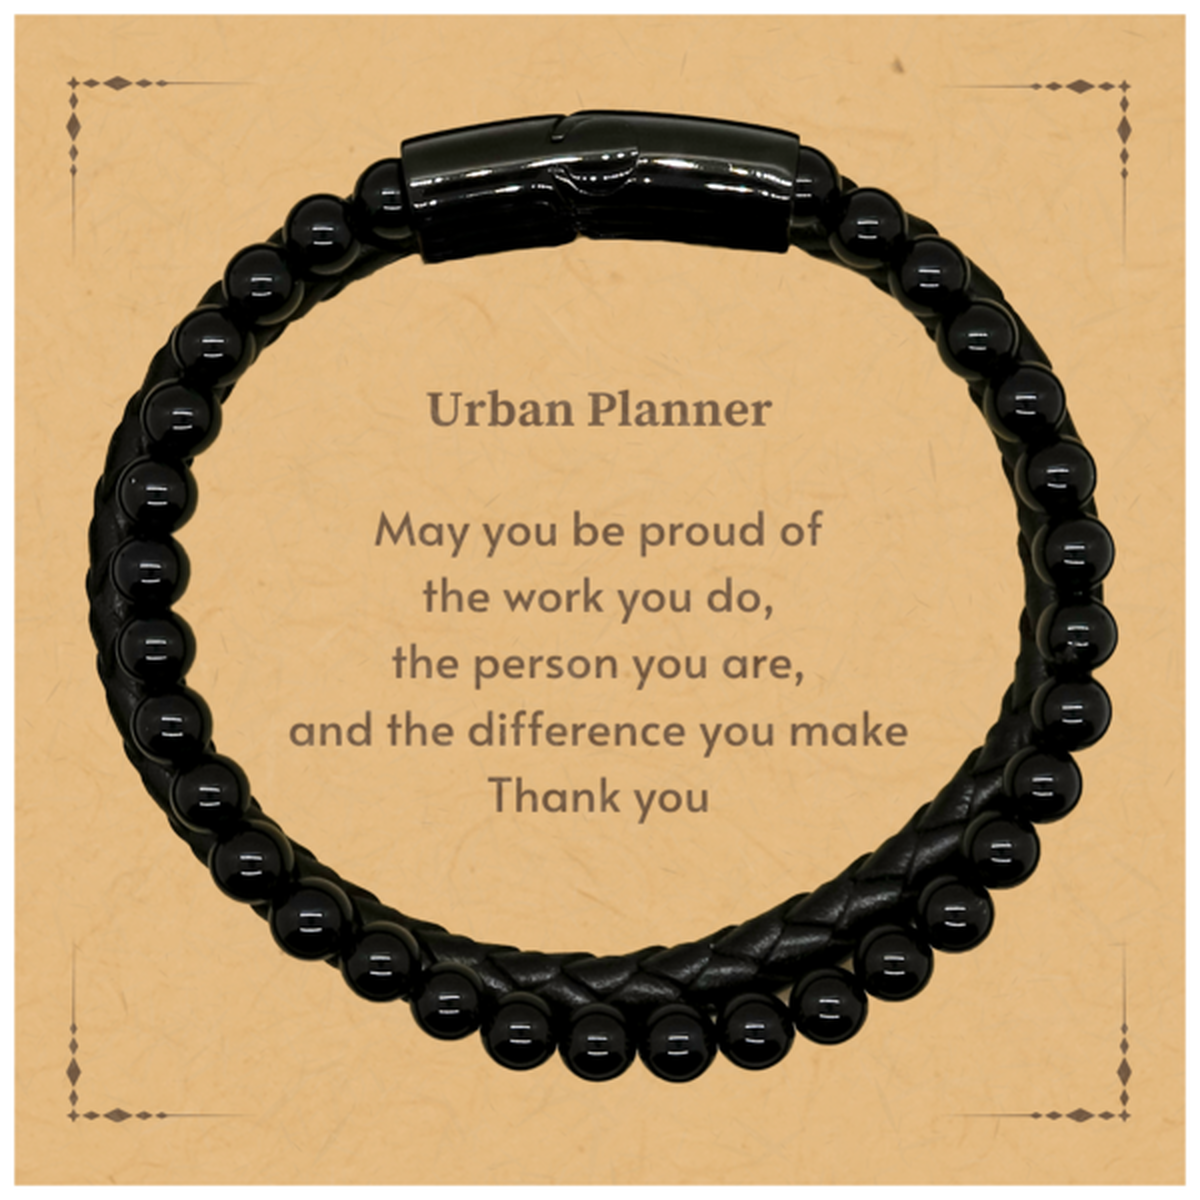 Heartwarming Stone Leather Bracelets Retirement Coworkers Gifts for Urban Planner, Urban Planner May You be proud of the work you do, the person you are Gifts for Boss Men Women Friends